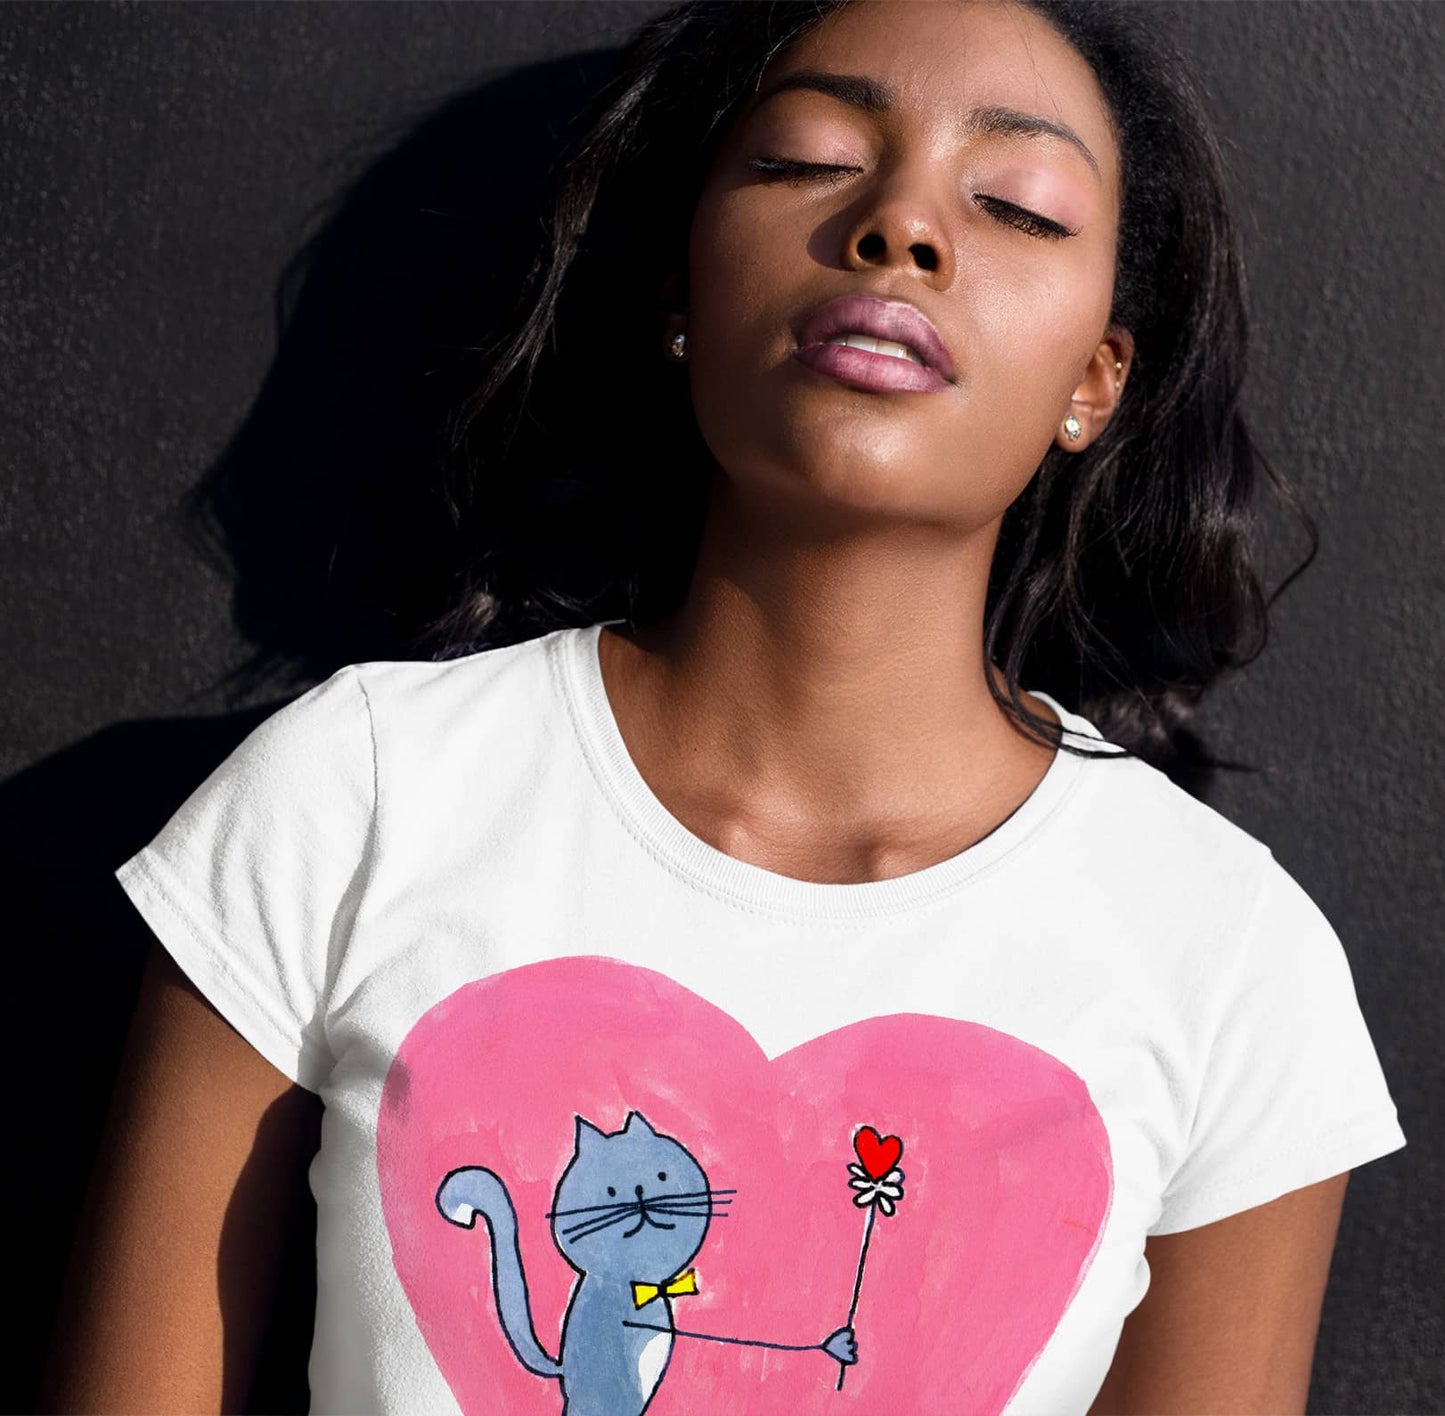 Pink Heart T-Shirt with a Grey Cat For Women Men Couples by Mike Dido